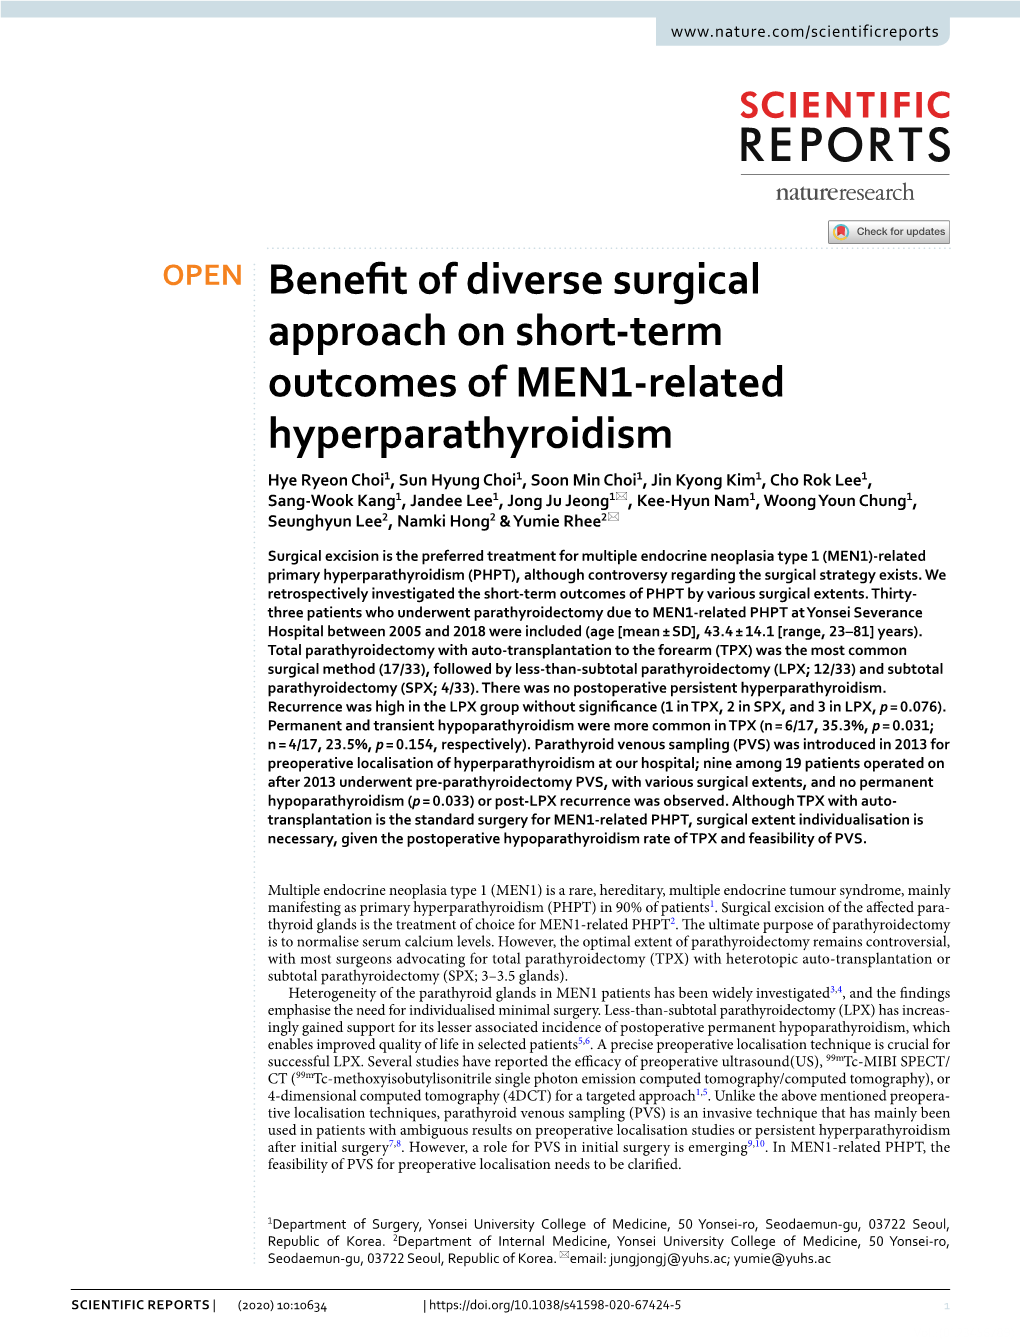 Benefit of Diverse Surgical Approach on Short-Term Outcomes of MEN1